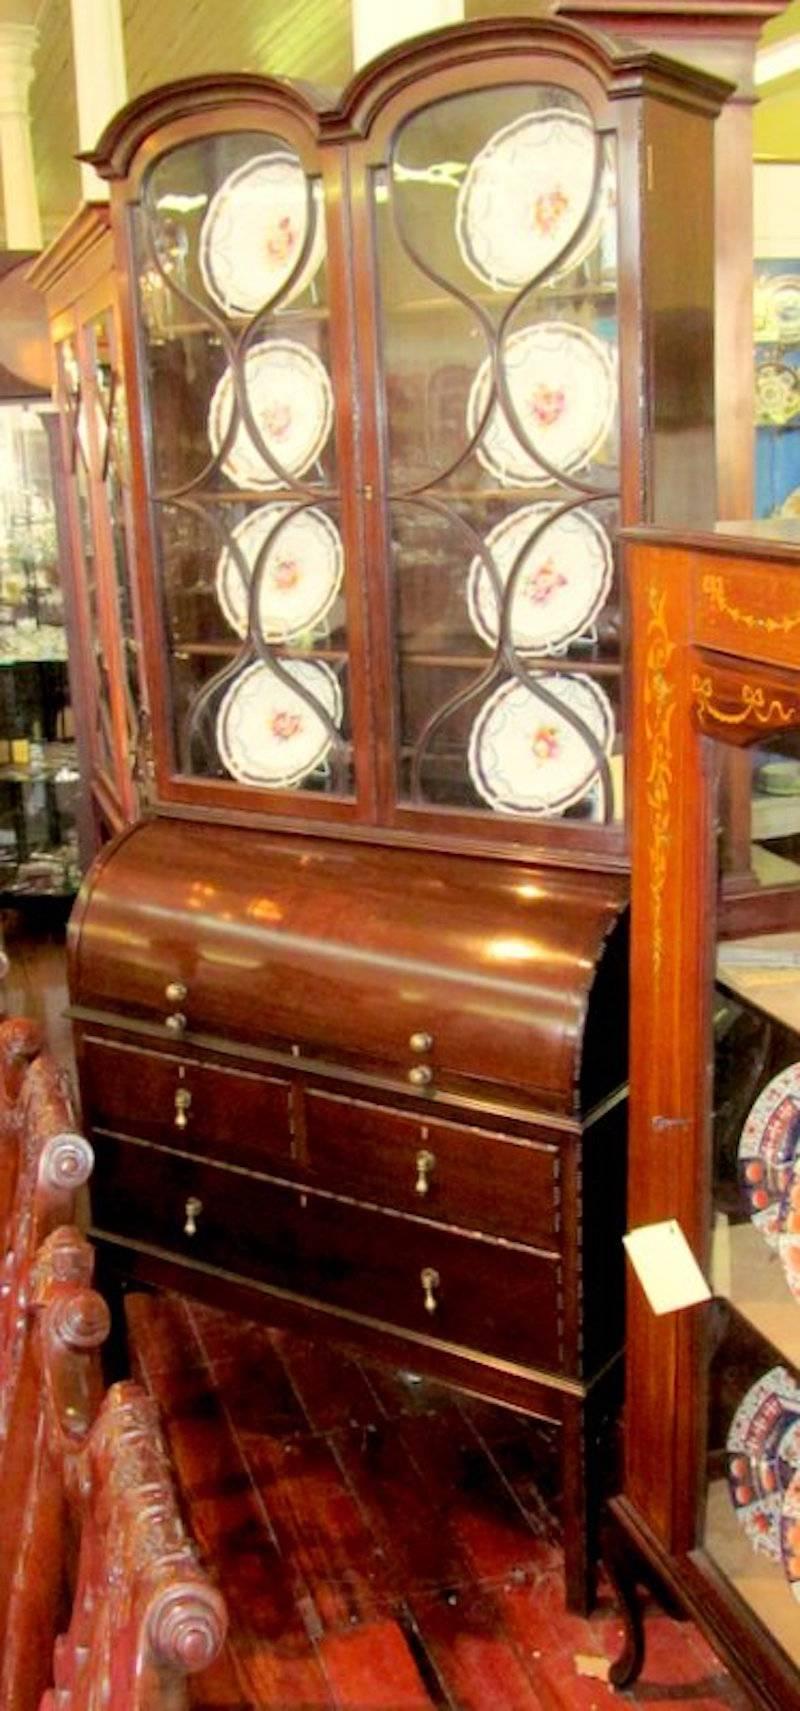 Rare and fine Old English Edwardian period double dome cylinder top inlaid mahogany bureau bookcase, with superb highly figured crotch or flame mahogany.
Superb ocndition and handsome barring along the double dome glazed top.

Please note handsome